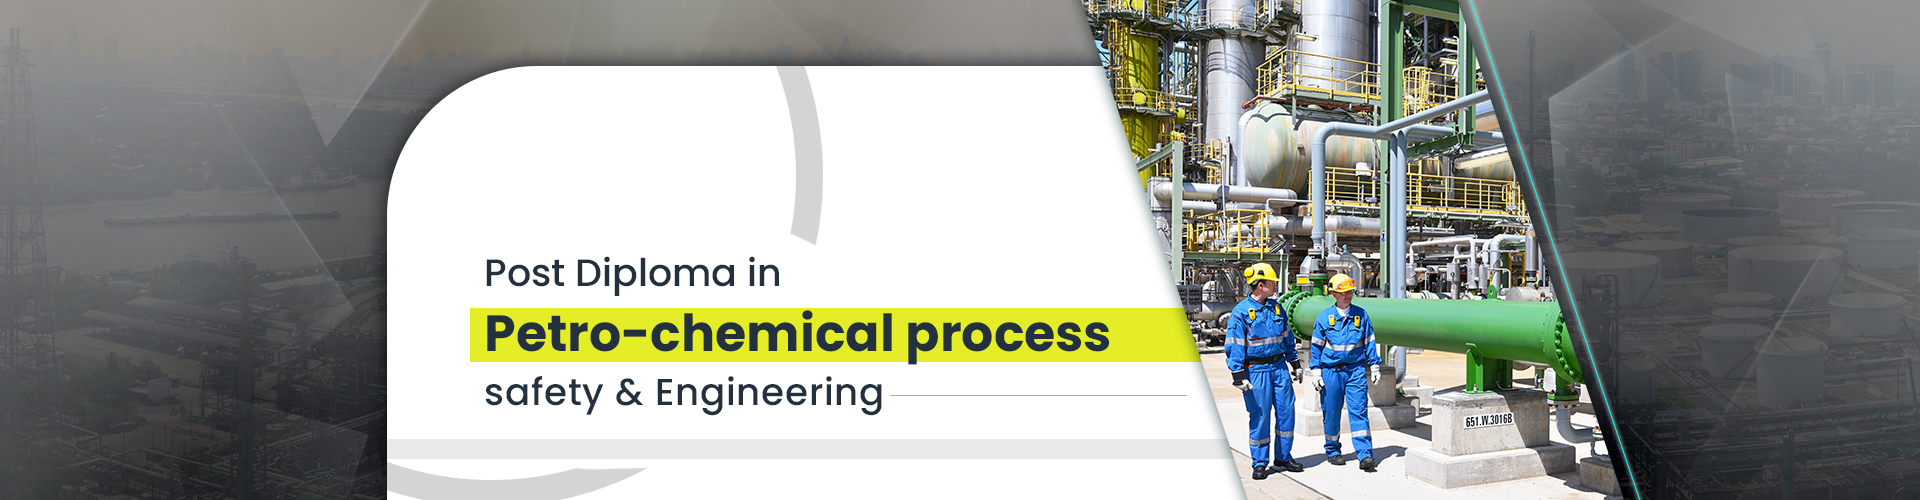 Post Diploma in Petro-chemical process safety & Engineering